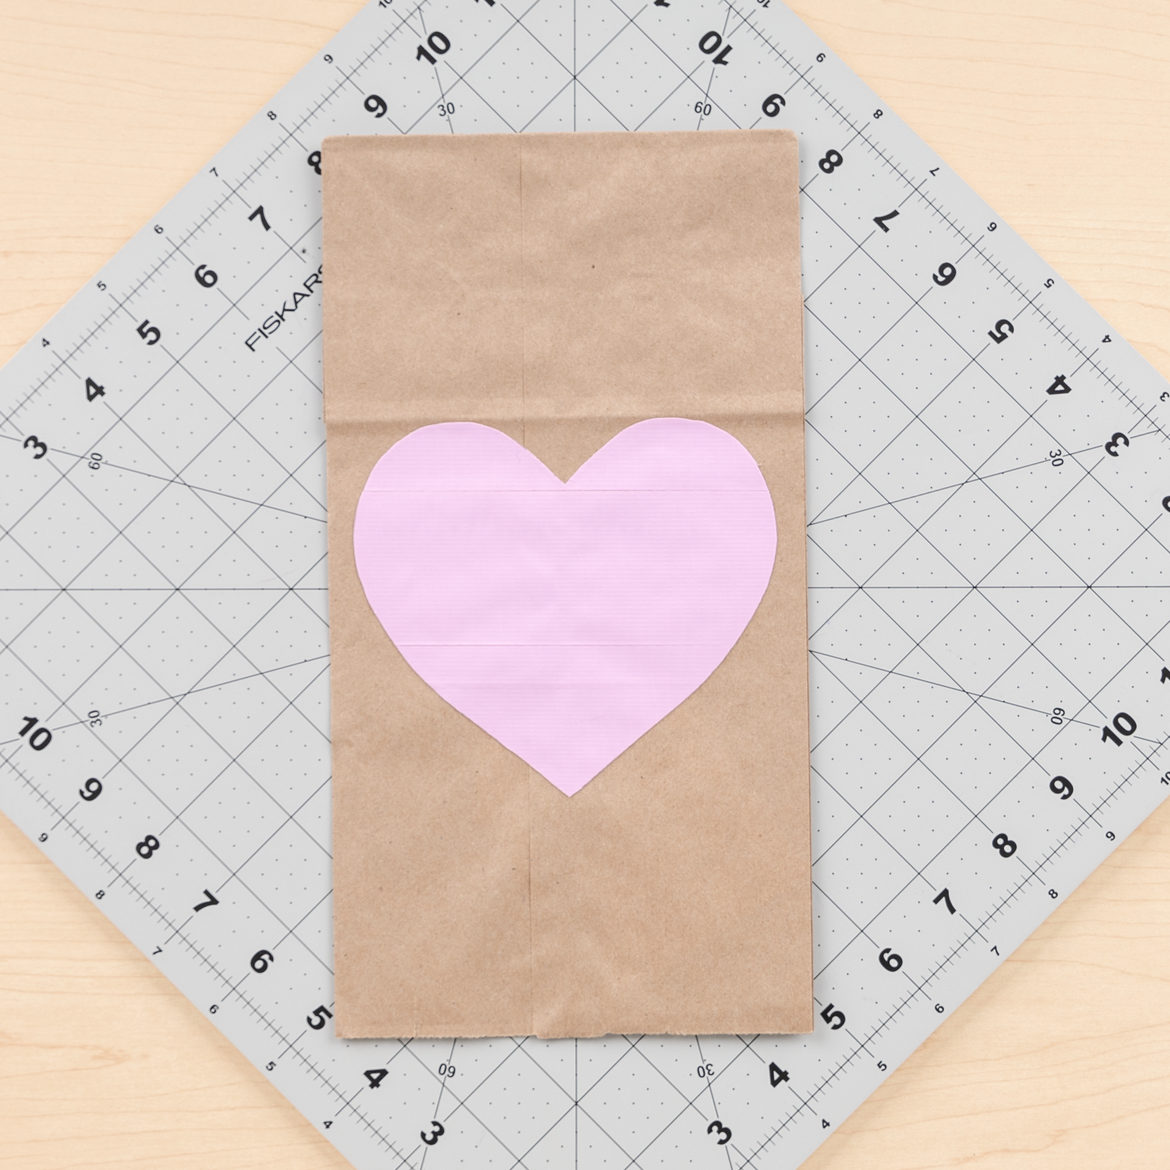 heart from the previous step attached to the paper bag